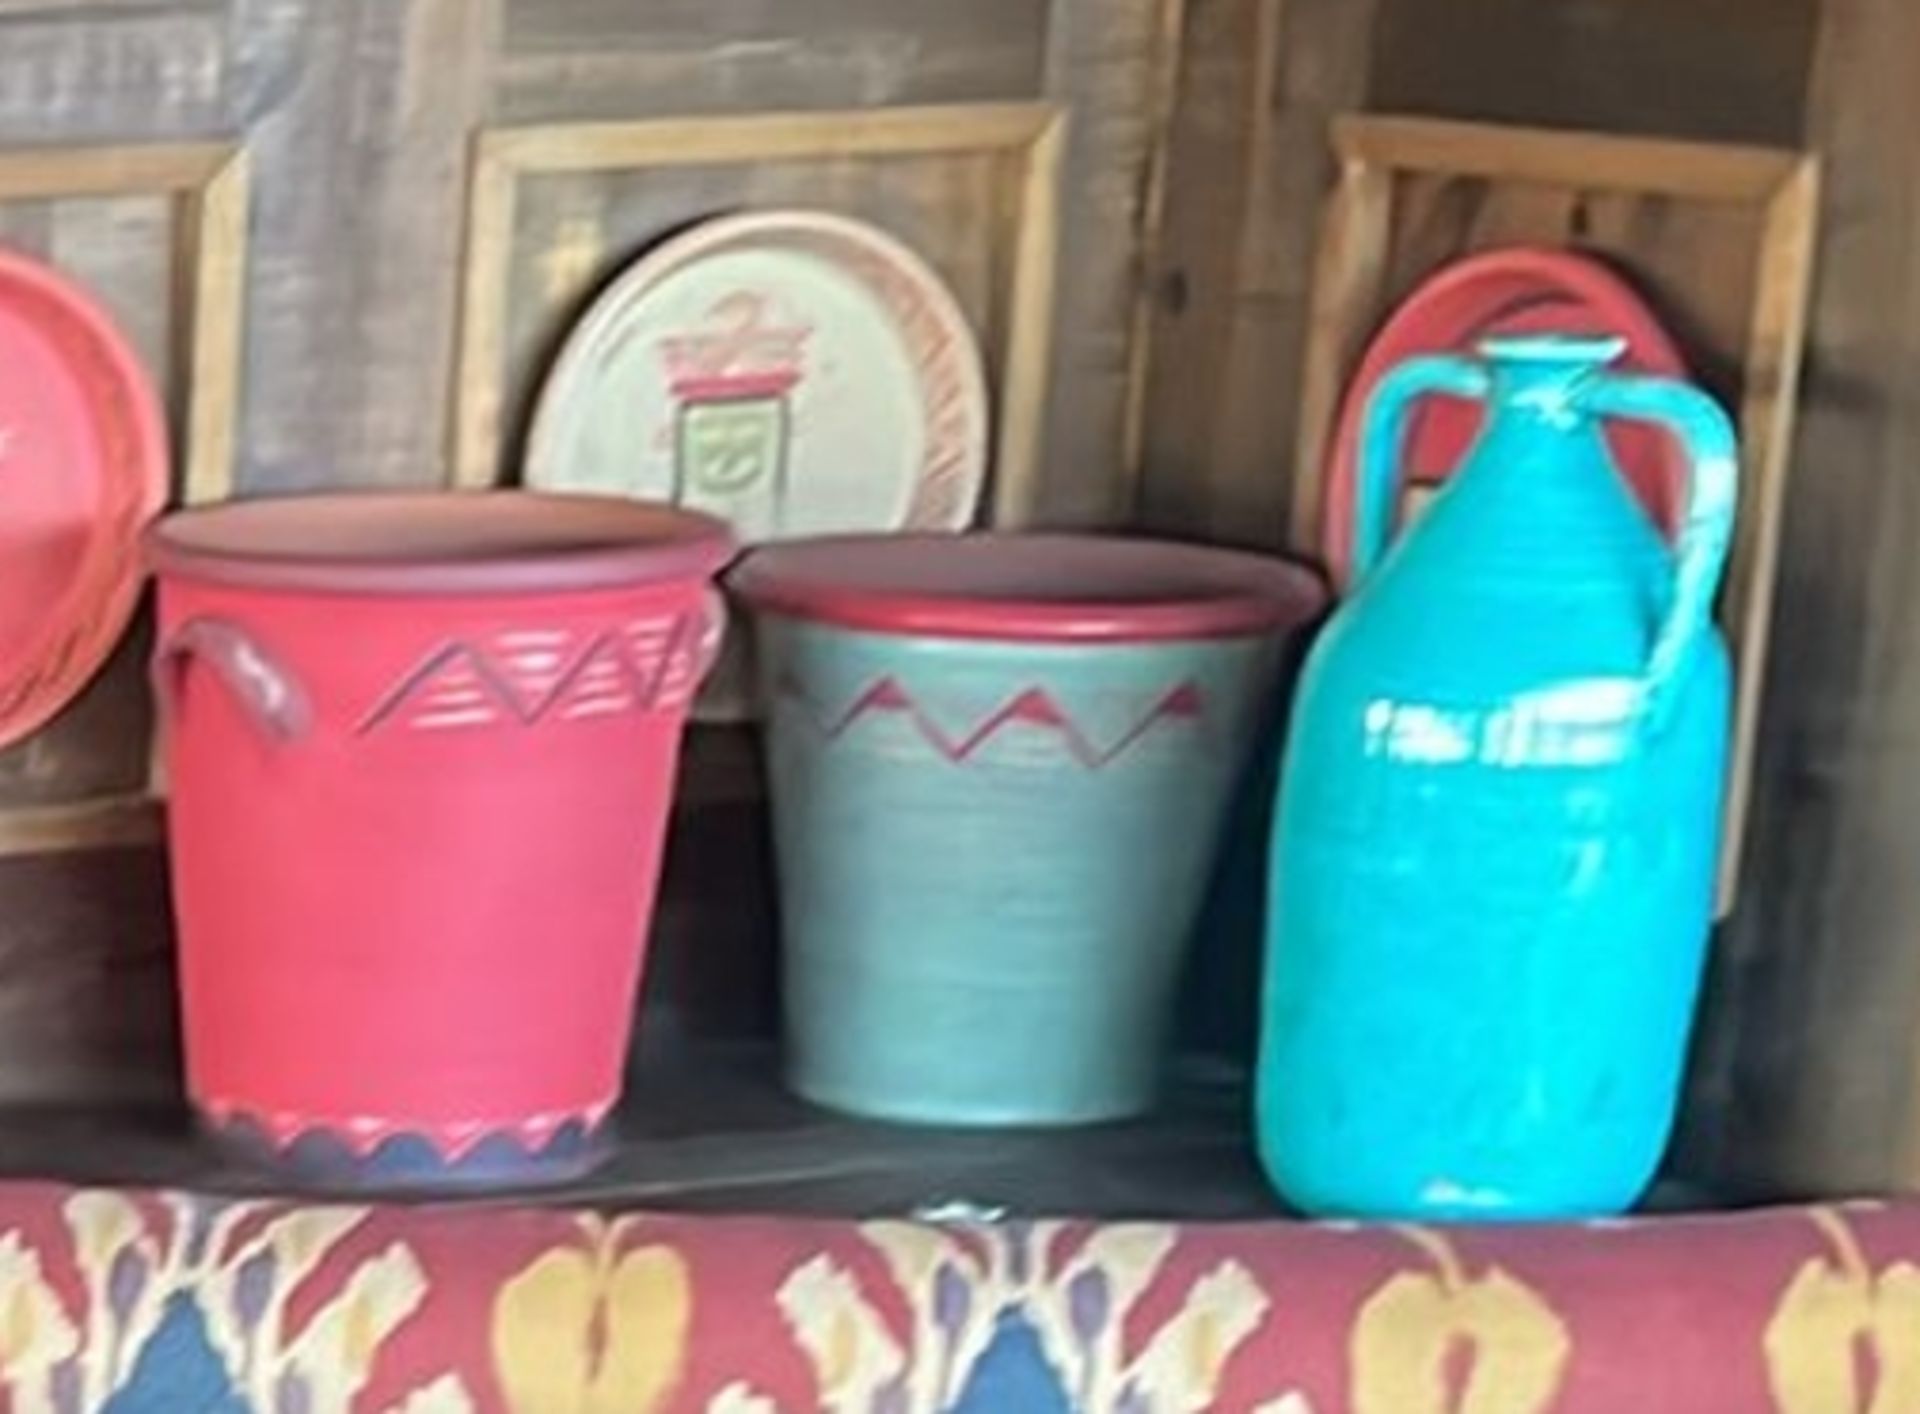 Approx 14 x Assorted Jugs, Vases and Buckets From a Mexican Themed Restaurant Restaurant - Image 2 of 7